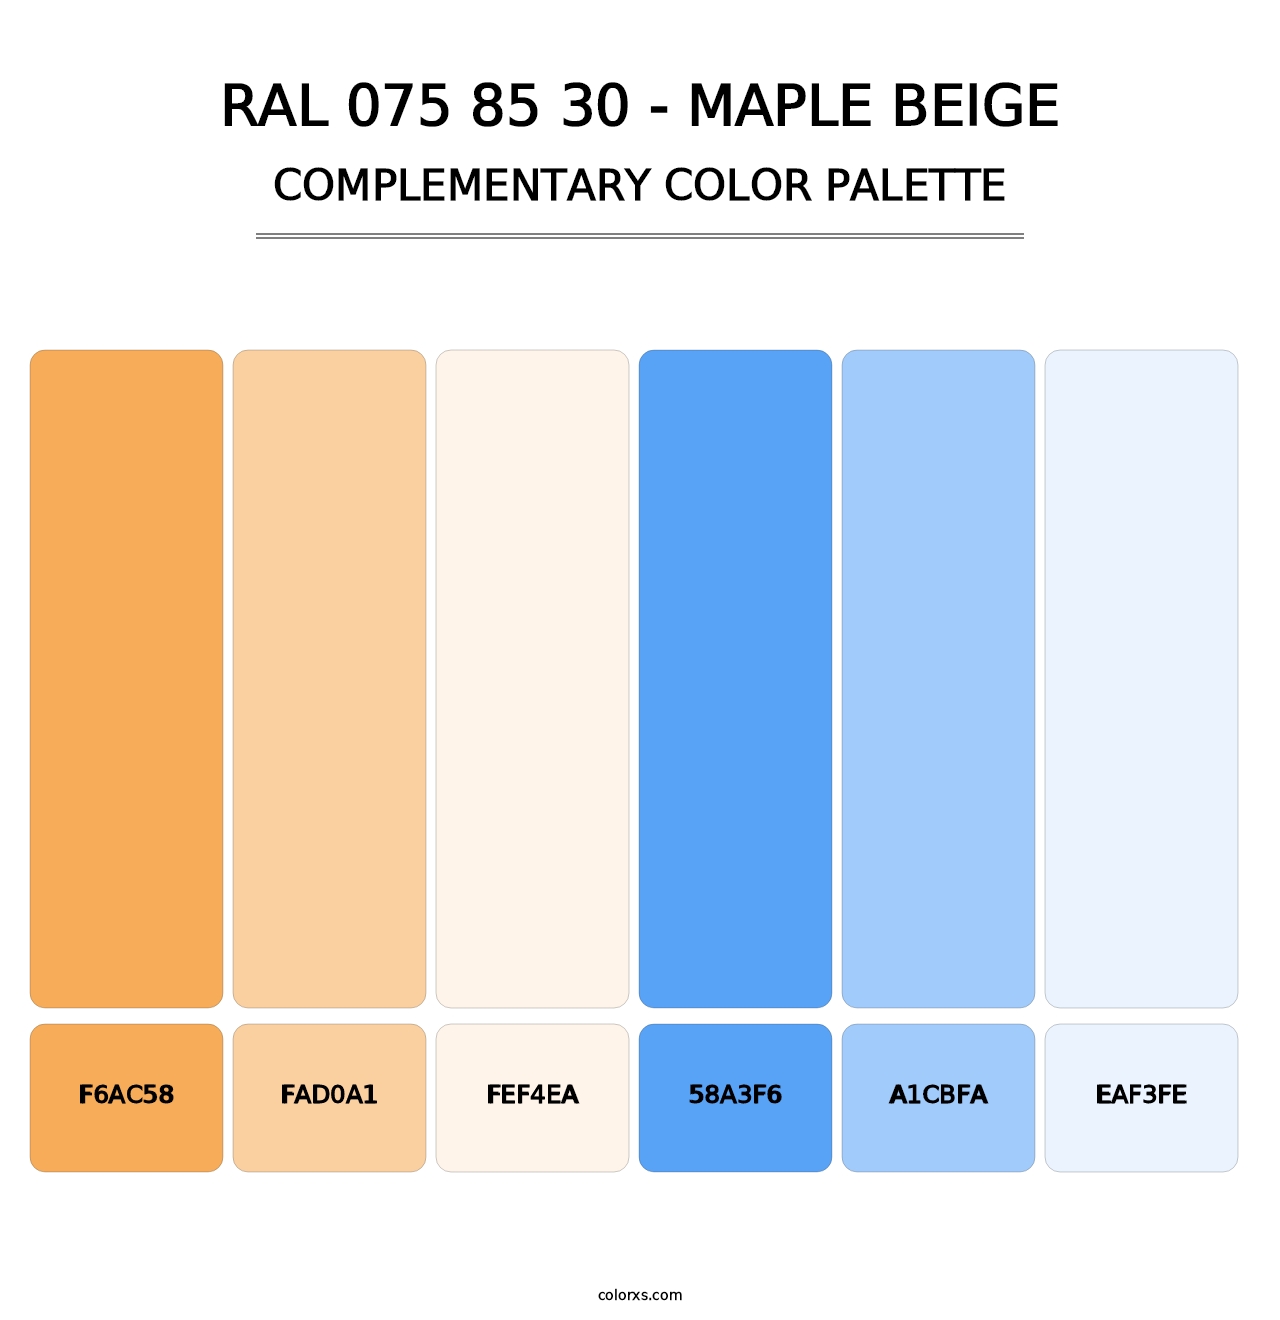 RAL 075 85 30 - Maple Beige - Complementary Color Palette